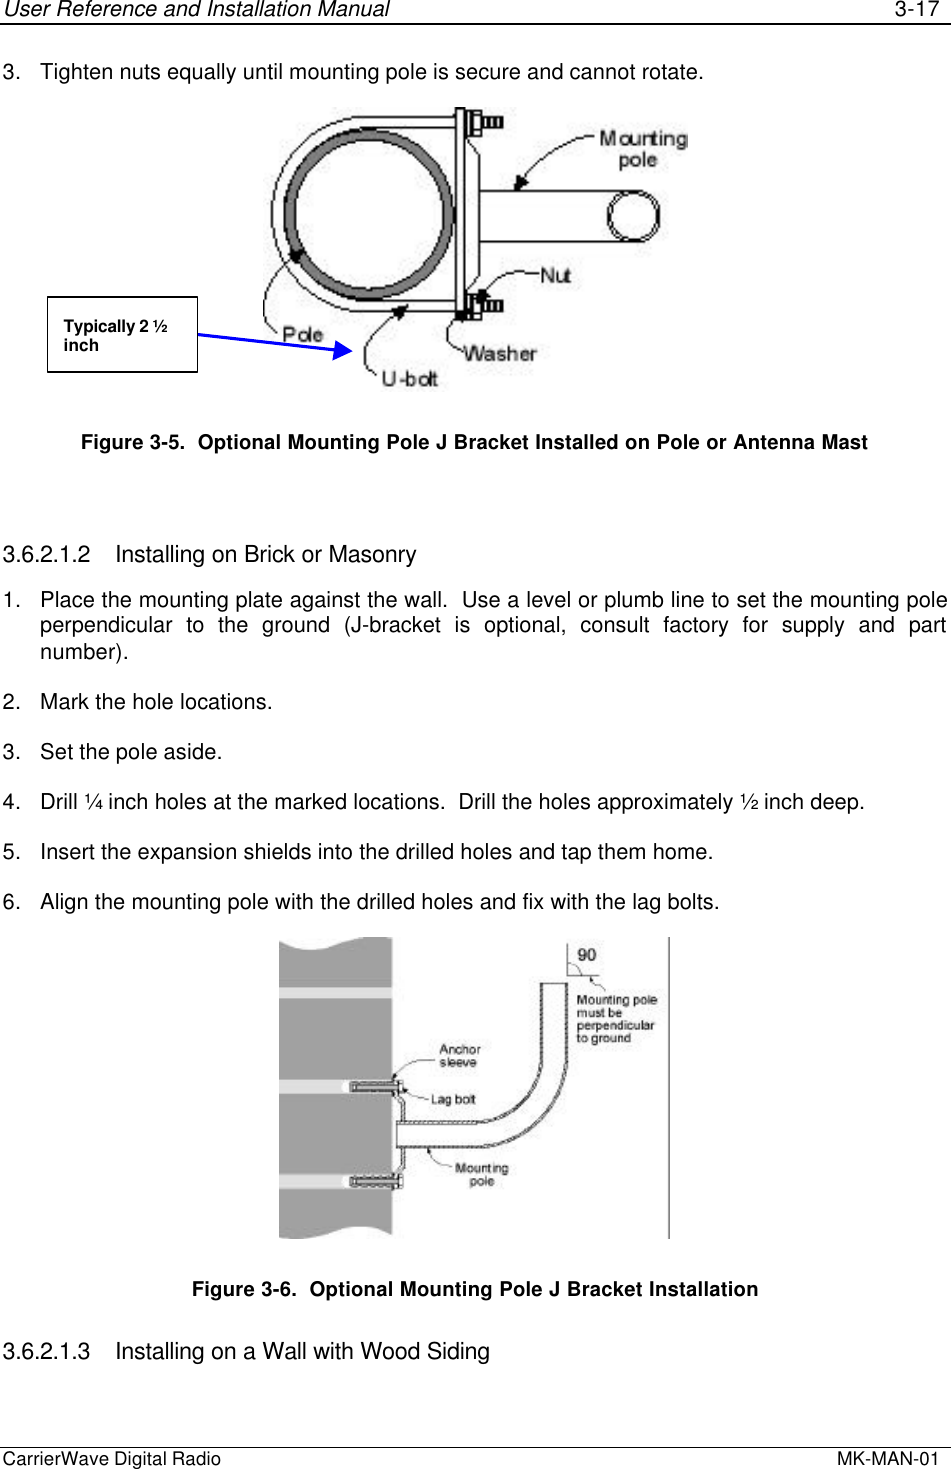 User Reference and Installation Manual 3-17CarrierWave Digital Radio  MK-MAN-013. Tighten nuts equally until mounting pole is secure and cannot rotate.Figure 3-5.  Optional Mounting Pole J Bracket Installed on Pole or Antenna Mast3.6.2.1.2 Installing on Brick or Masonry1. Place the mounting plate against the wall.  Use a level or plumb line to set the mounting poleperpendicular to the ground (J-bracket is optional, consult factory for supply and partnumber).2. Mark the hole locations.3. Set the pole aside.4. Drill ¼ inch holes at the marked locations.  Drill the holes approximately ½ inch deep.5. Insert the expansion shields into the drilled holes and tap them home.6. Align the mounting pole with the drilled holes and fix with the lag bolts.Figure 3-6.  Optional Mounting Pole J Bracket Installation3.6.2.1.3 Installing on a Wall with Wood SidingTypically 2 ½inch